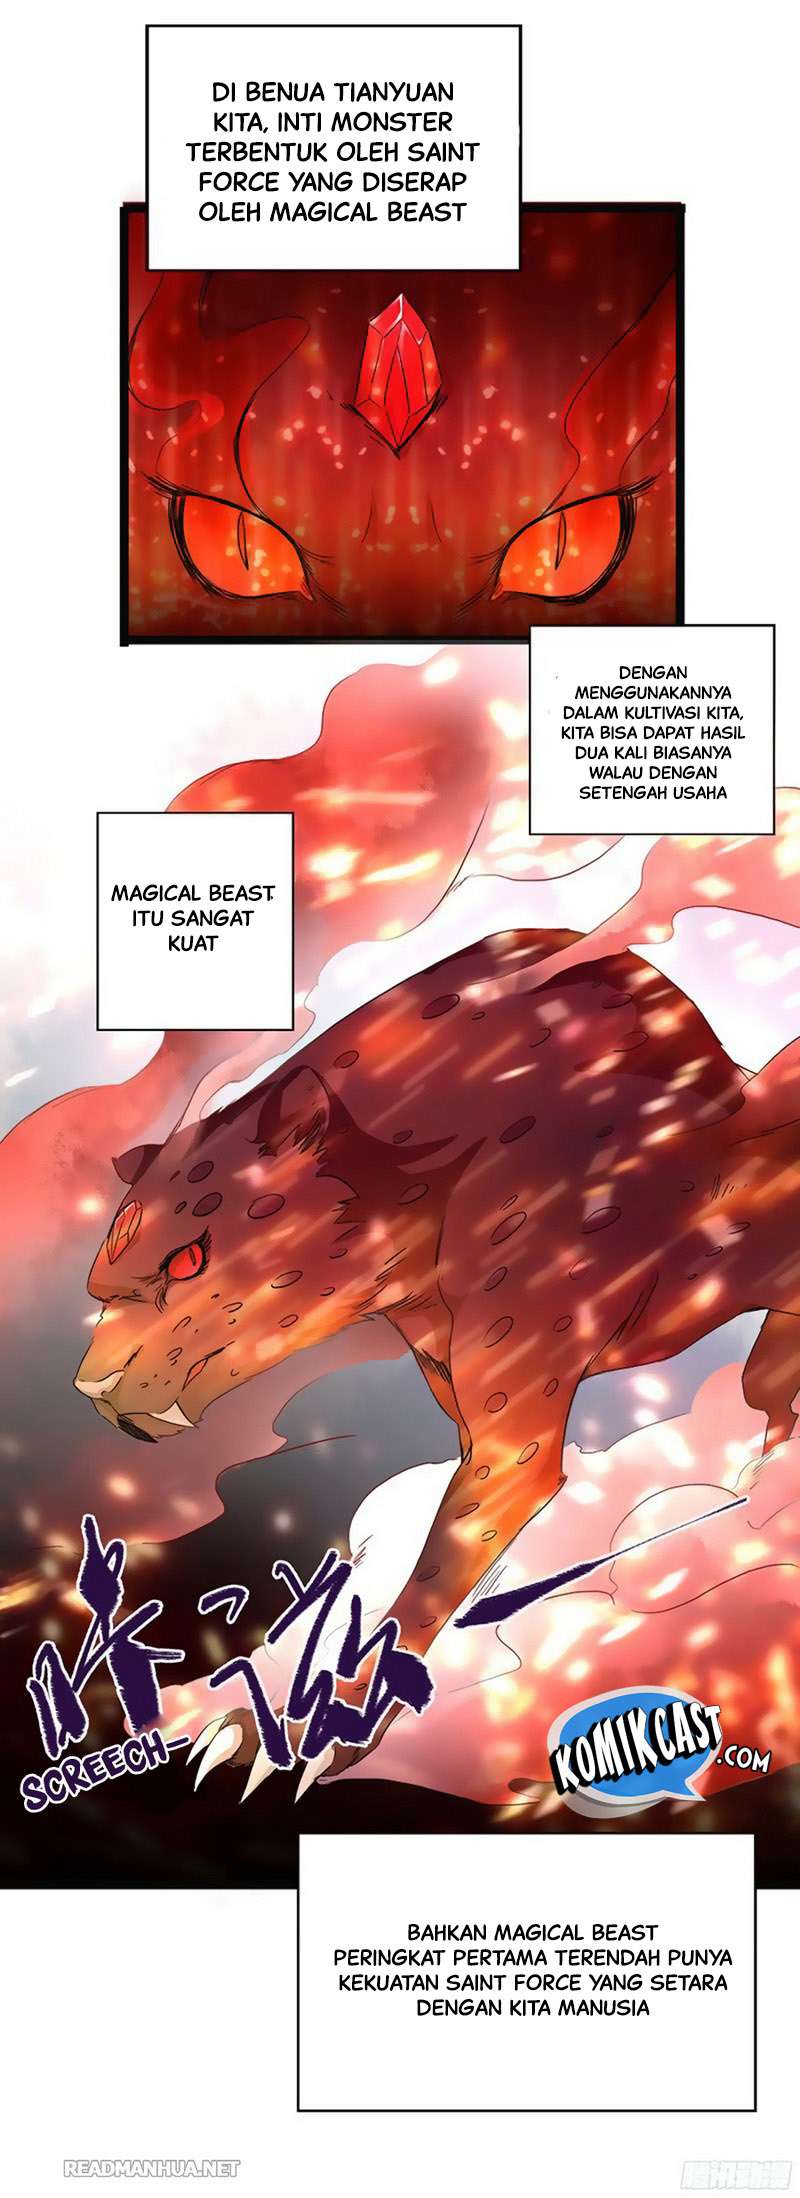 Chaotic Sword God Chapter 06